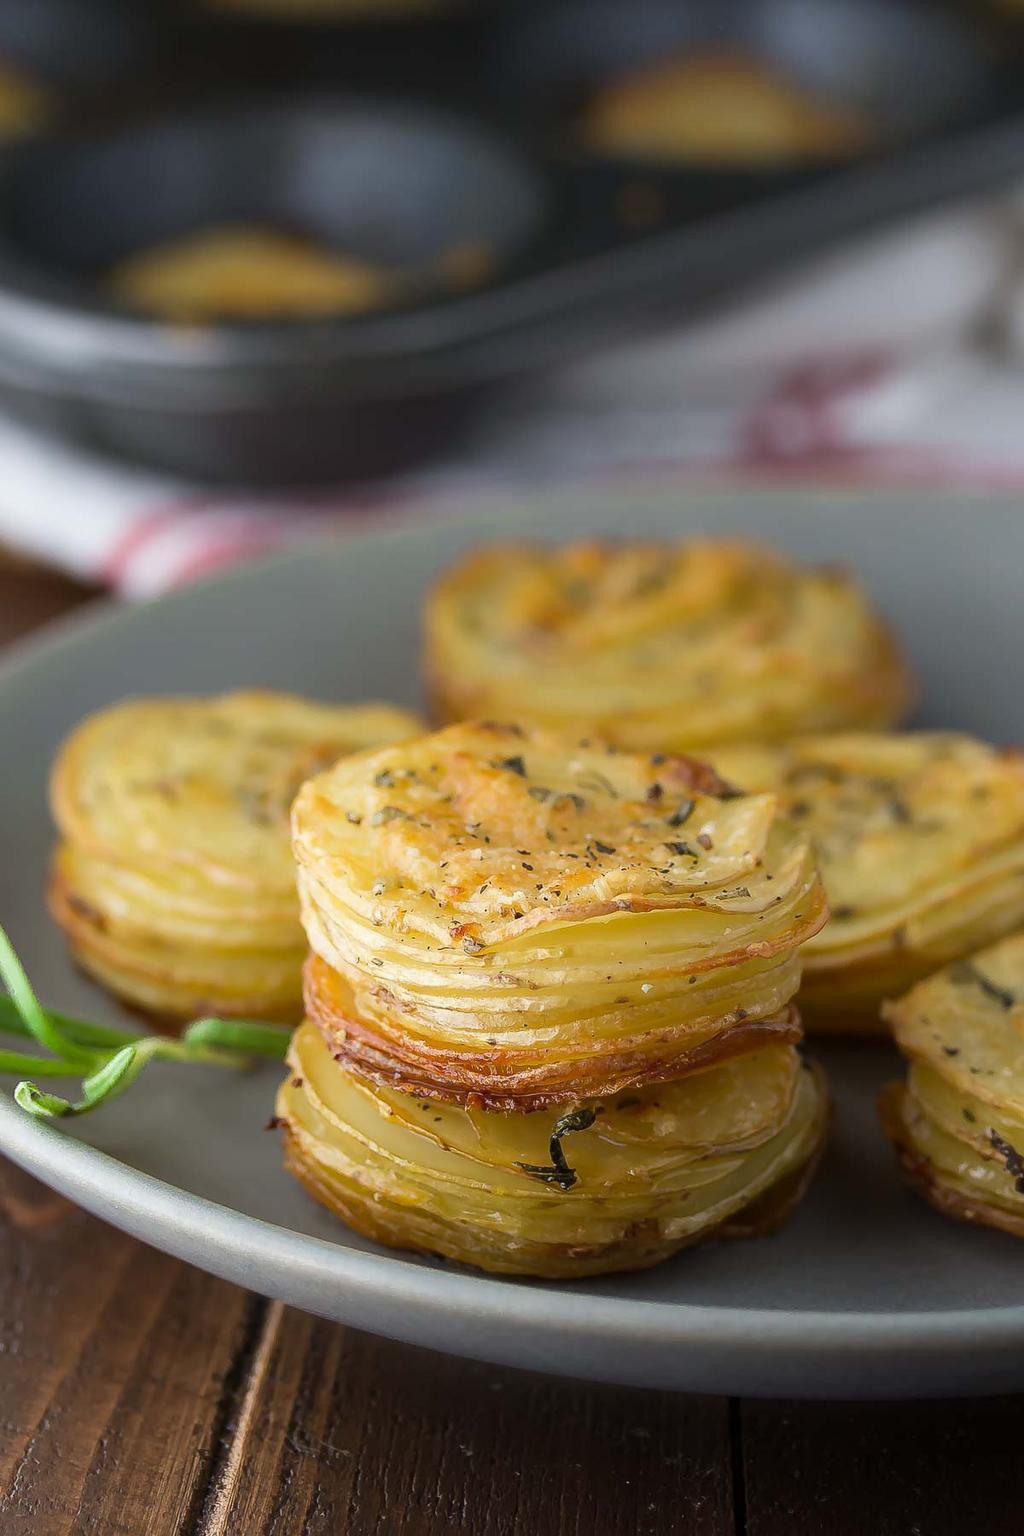 7: Parmesan & Rosemary Potato Stacks finely chopped 4 small white or Yukon gold potatoes 1 teaspoon kosher salt ¼ cup unsalted butter, melted fresh black pepper 1 tablespoon fresh rosemary, 1/4 cup